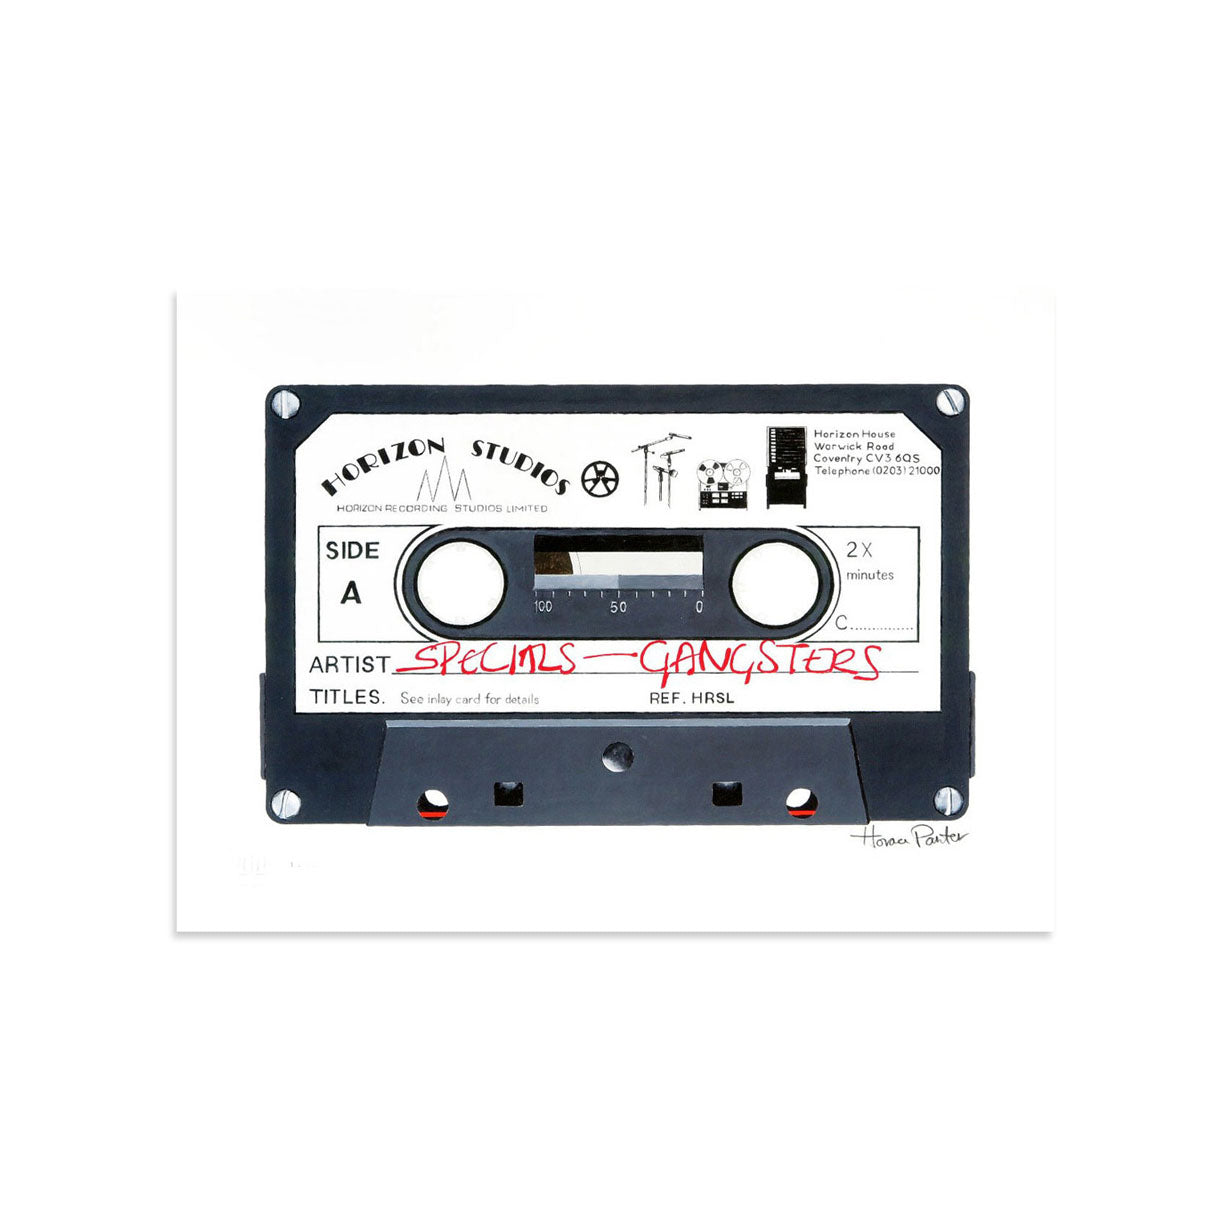 Gangsters (The Specials) by Horace Panter | Print | Poster Child Prints